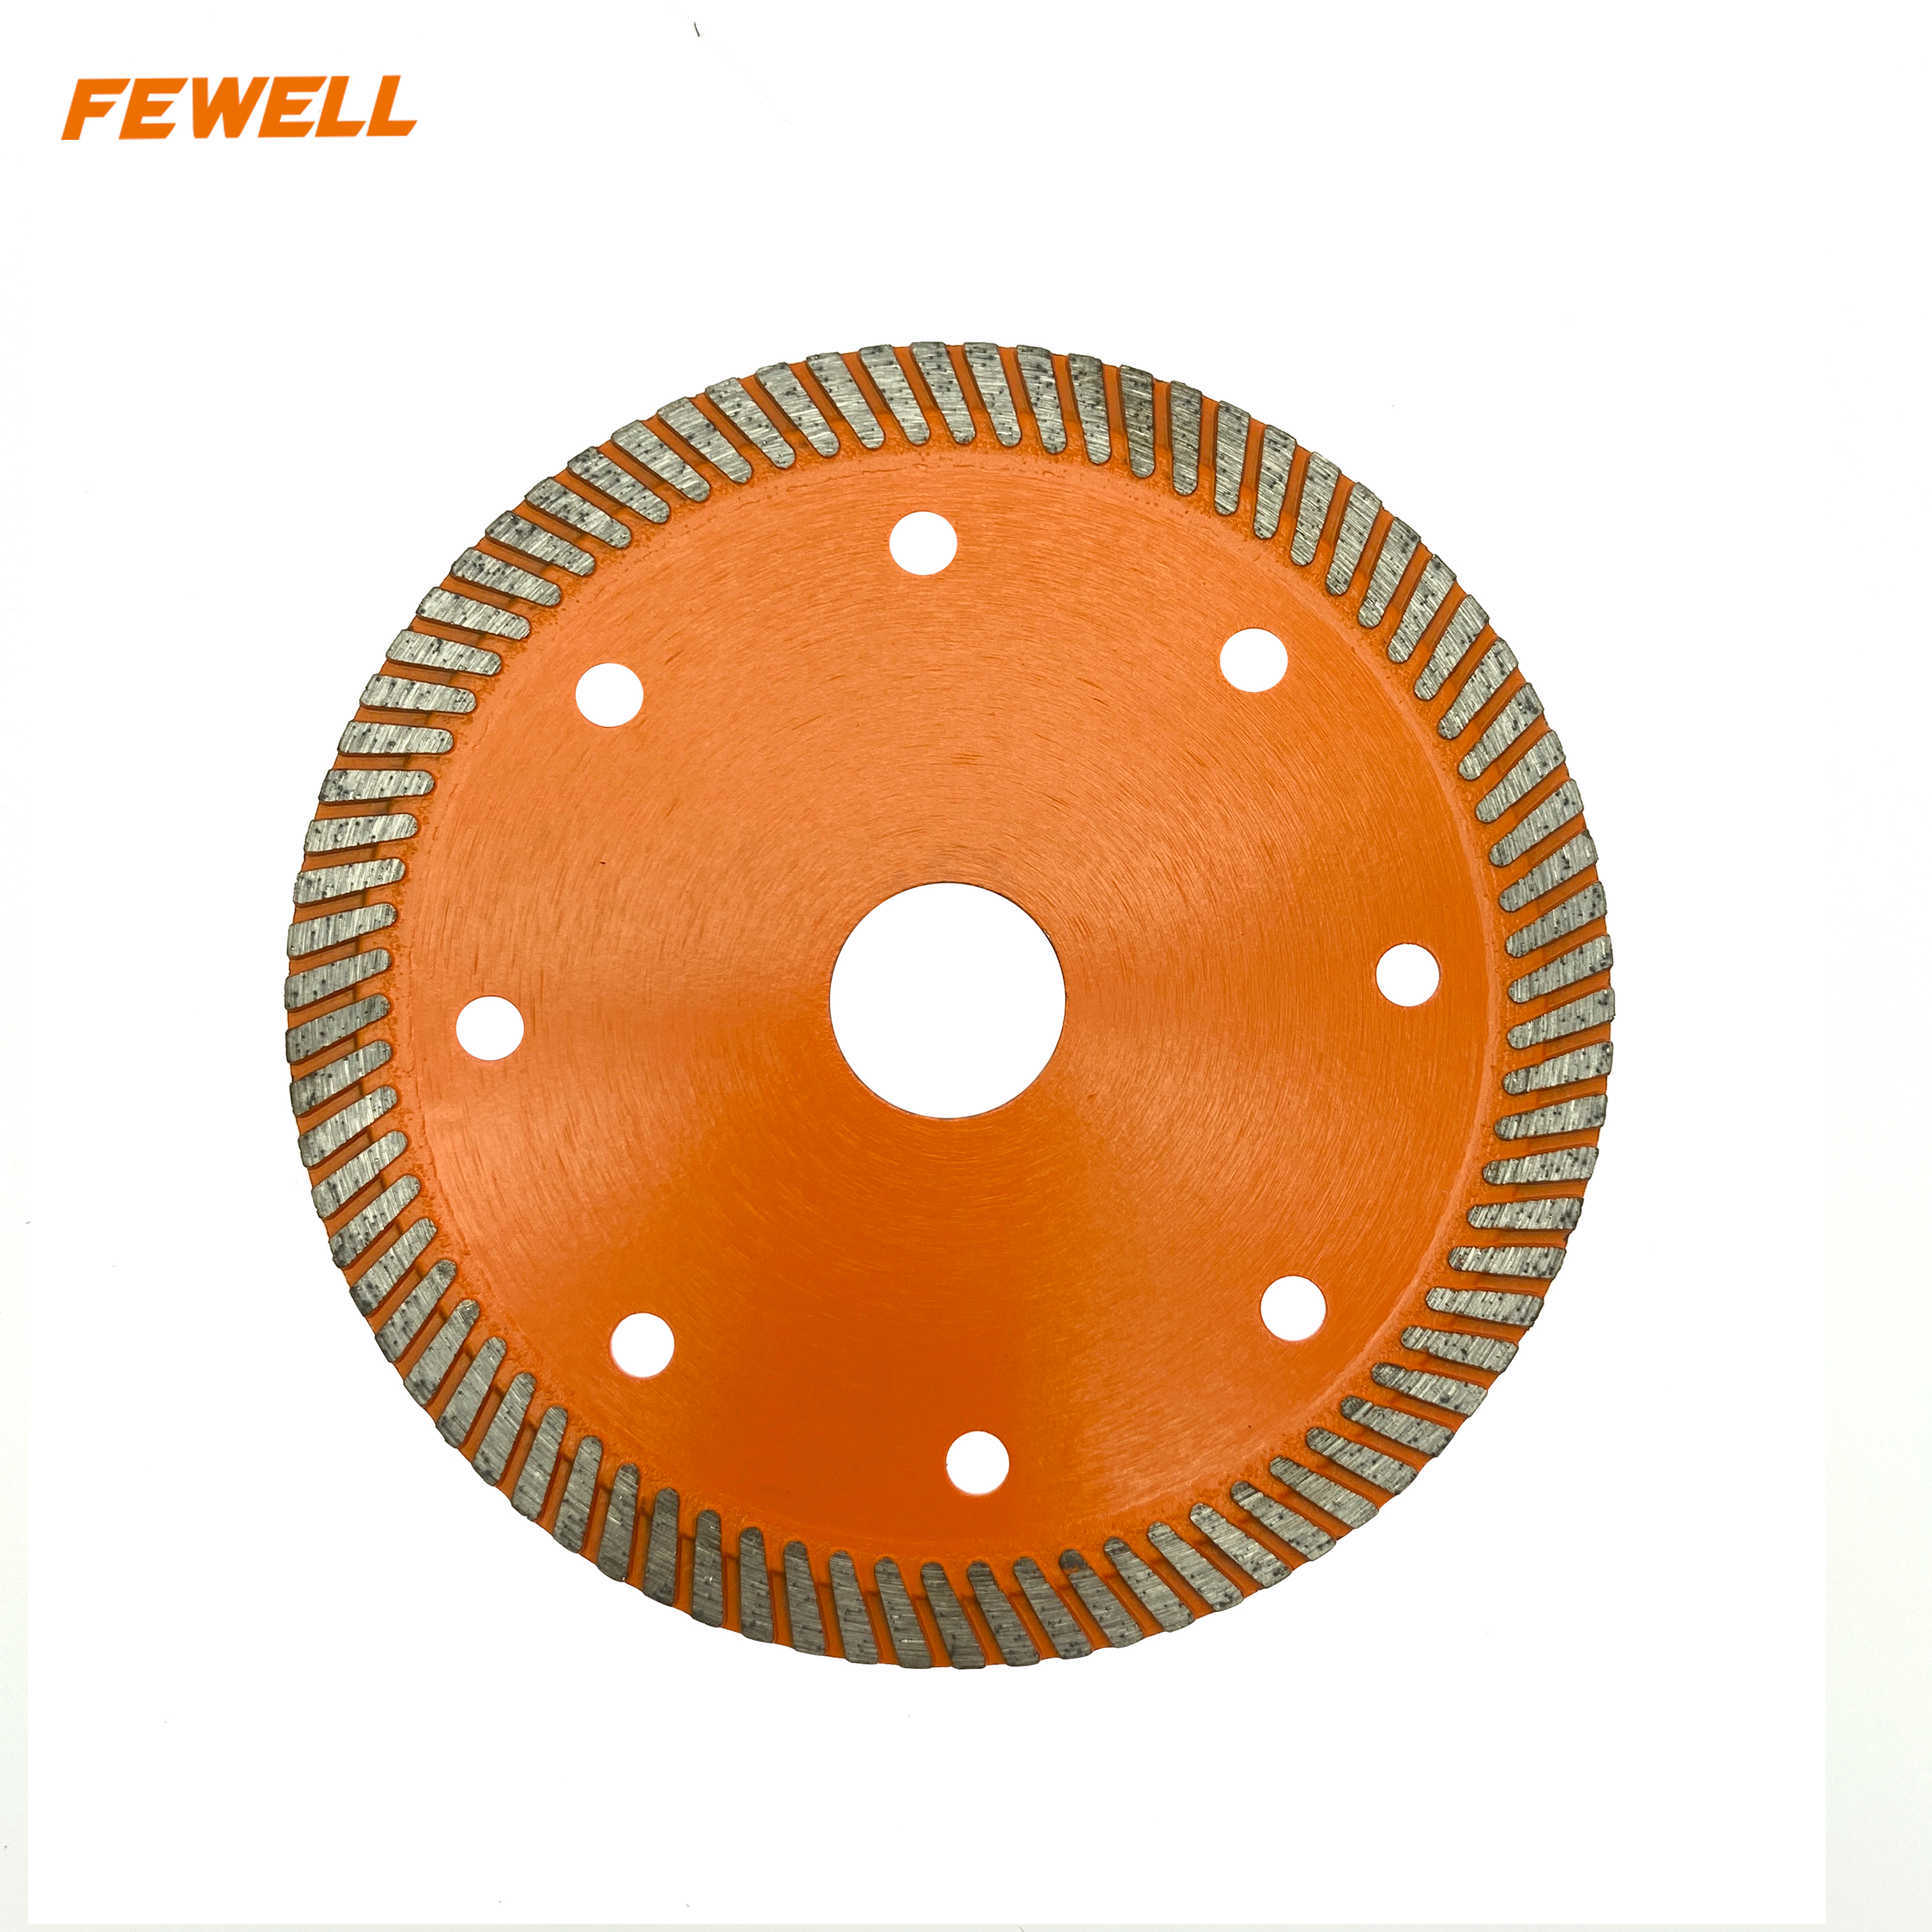 High quality Hot press 5、6、7、9inch 125-230*10mm fine turbo diamond saw blade for wet or dry cutting granite and bricks